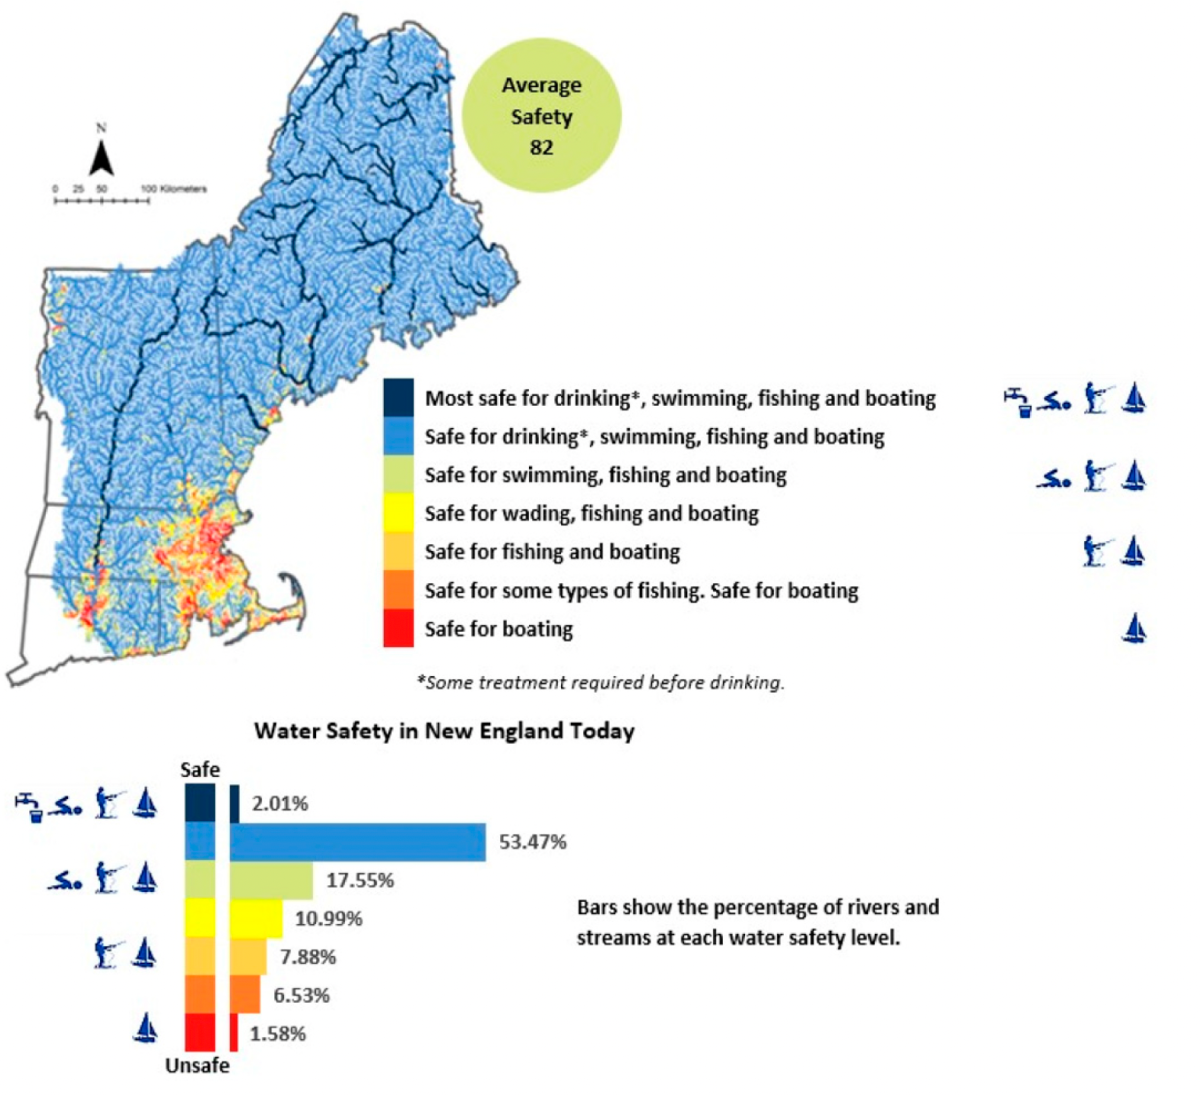 A map showing the safeness of water in New England for various activities, including drinking, fishing and swimming.